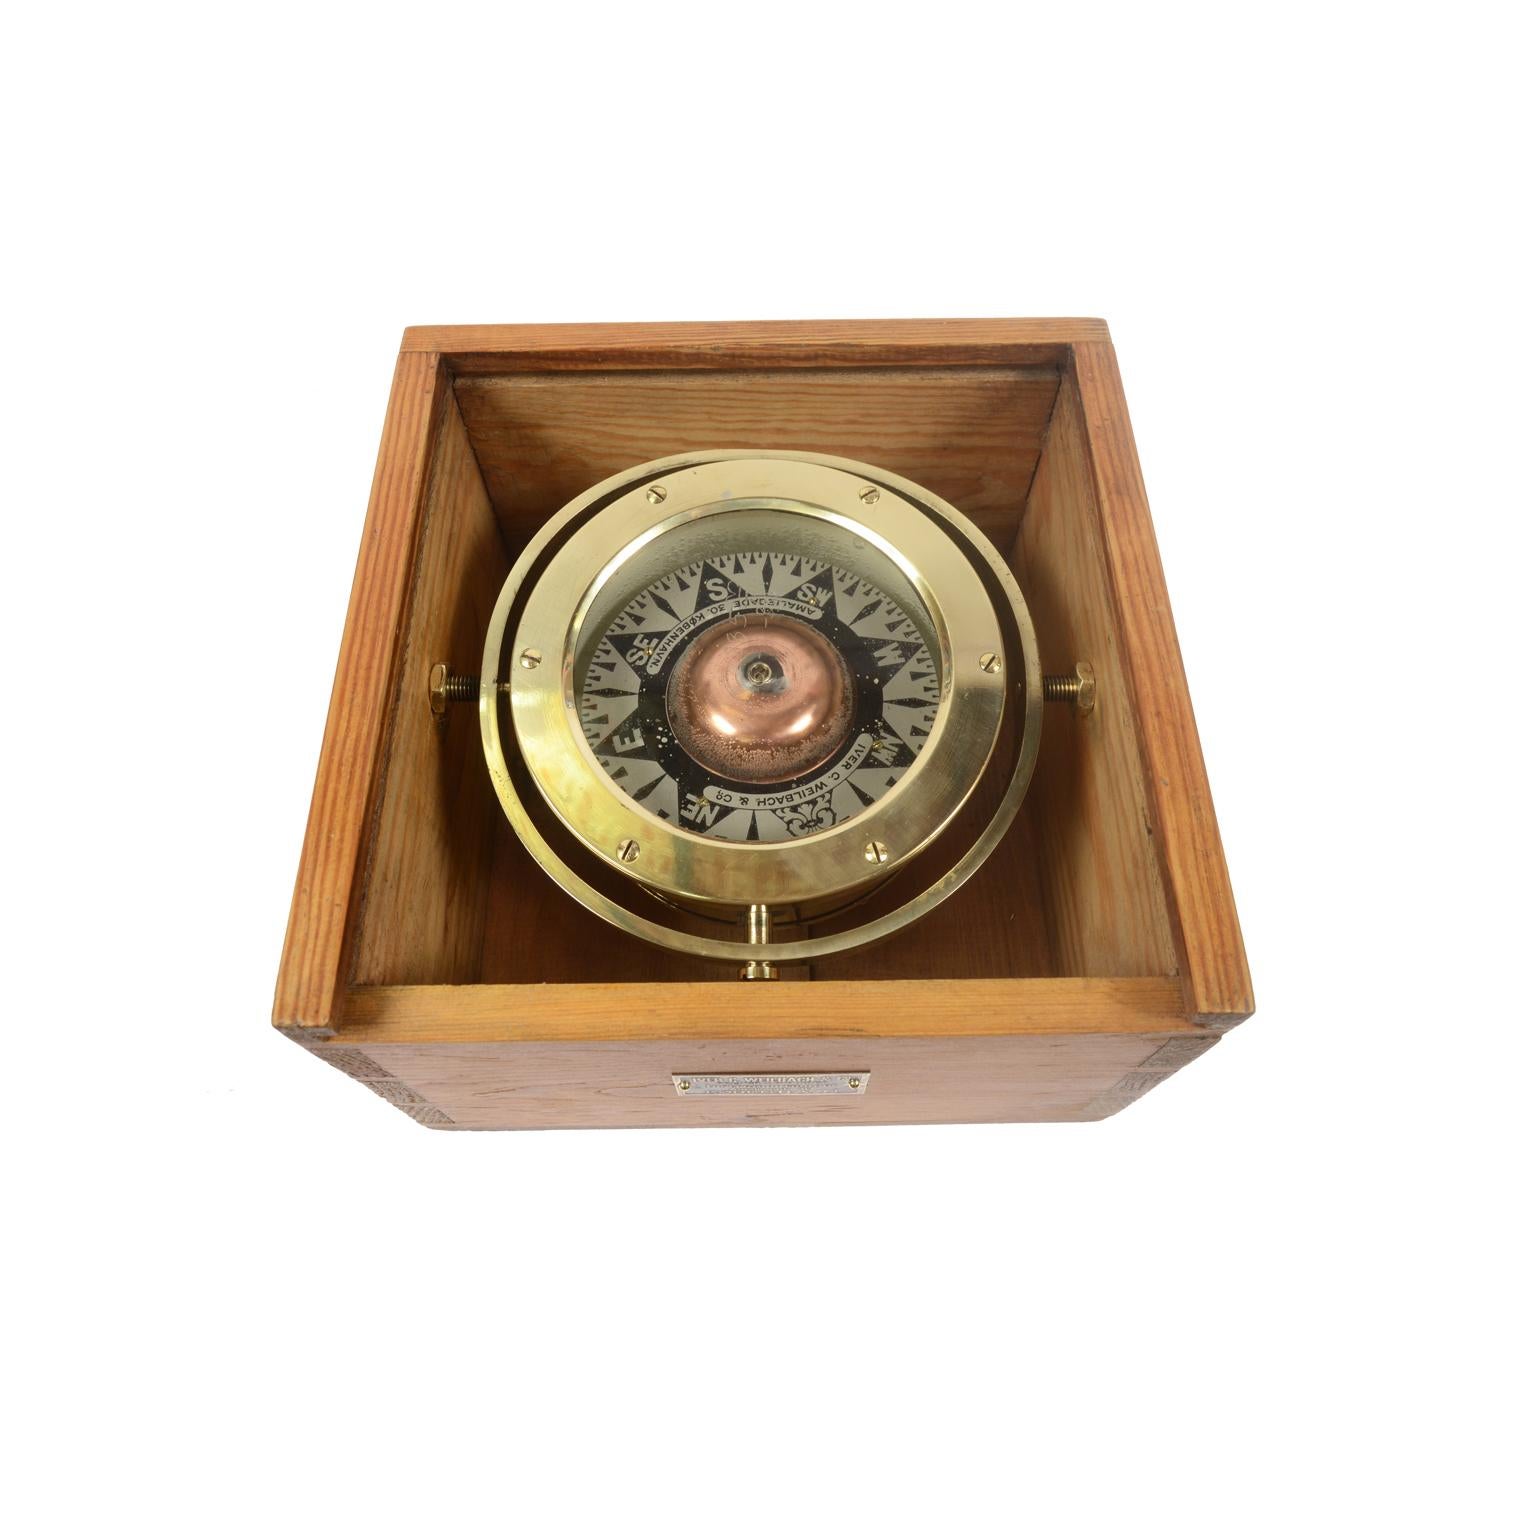 Magnetic compass on universal joint in its original wooden box with slot lid, produced by Iver C. Weilbach & Co Amaliegade 30 Copenhagen. The compass consists of a cylindrical vessel of brass and bronze, called a mortar, on the bottom of which is